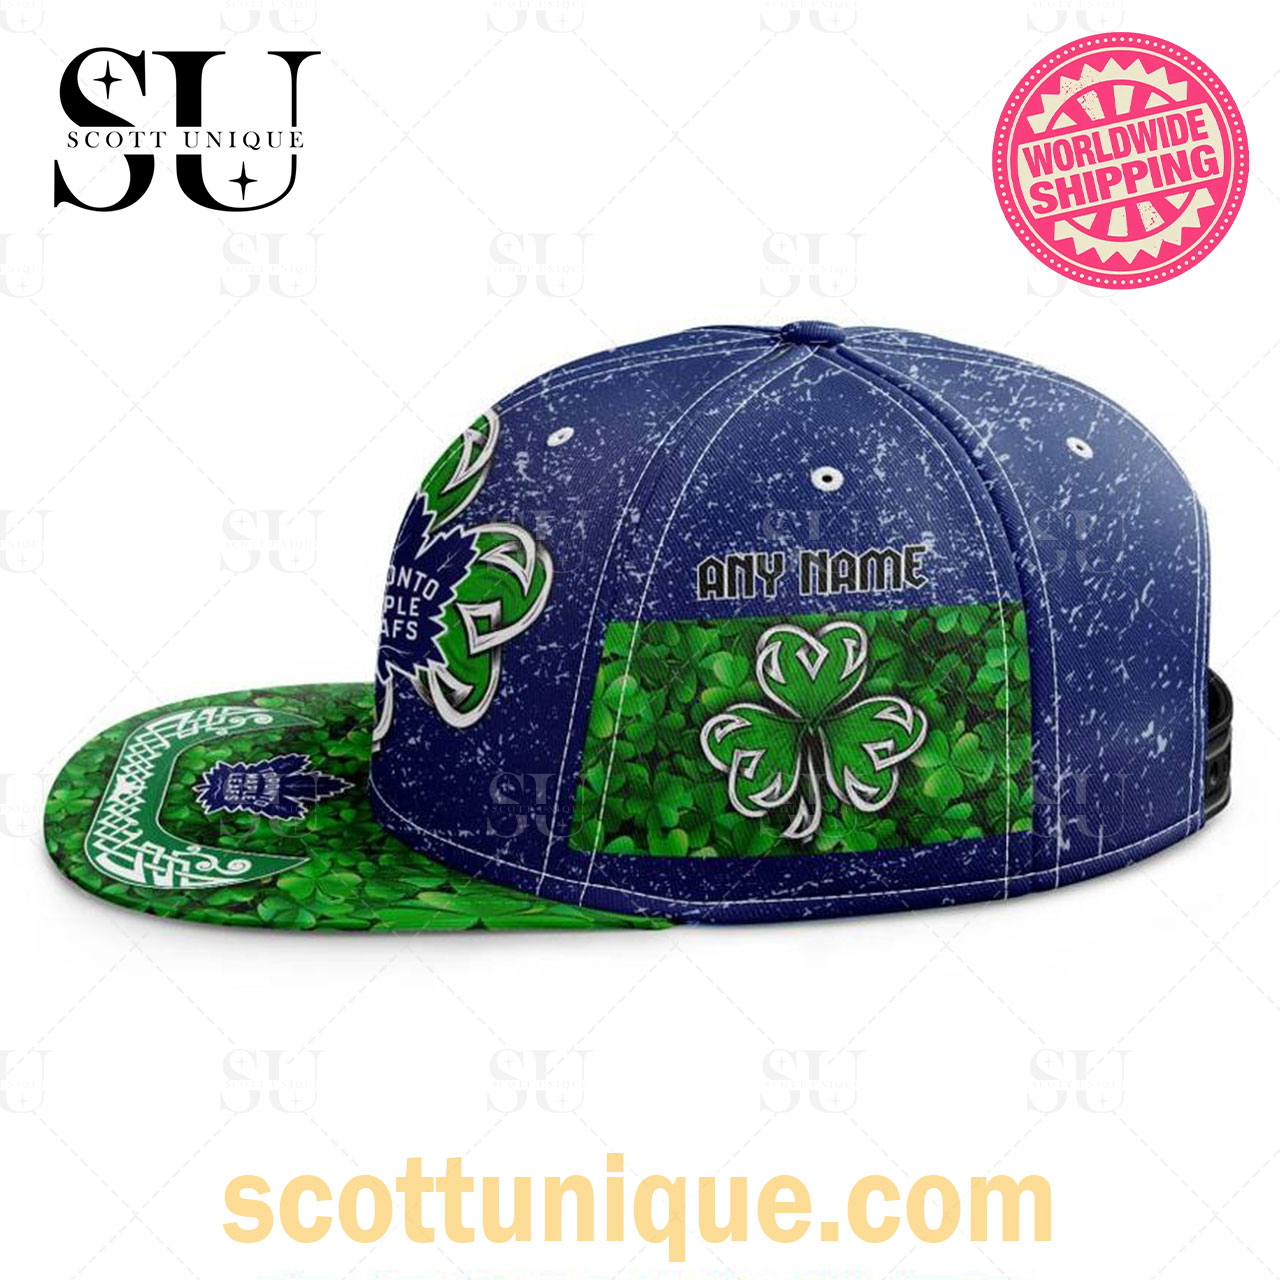 NHL Toronto Maple Leafs St Patricks Day Special Personalized Snapback